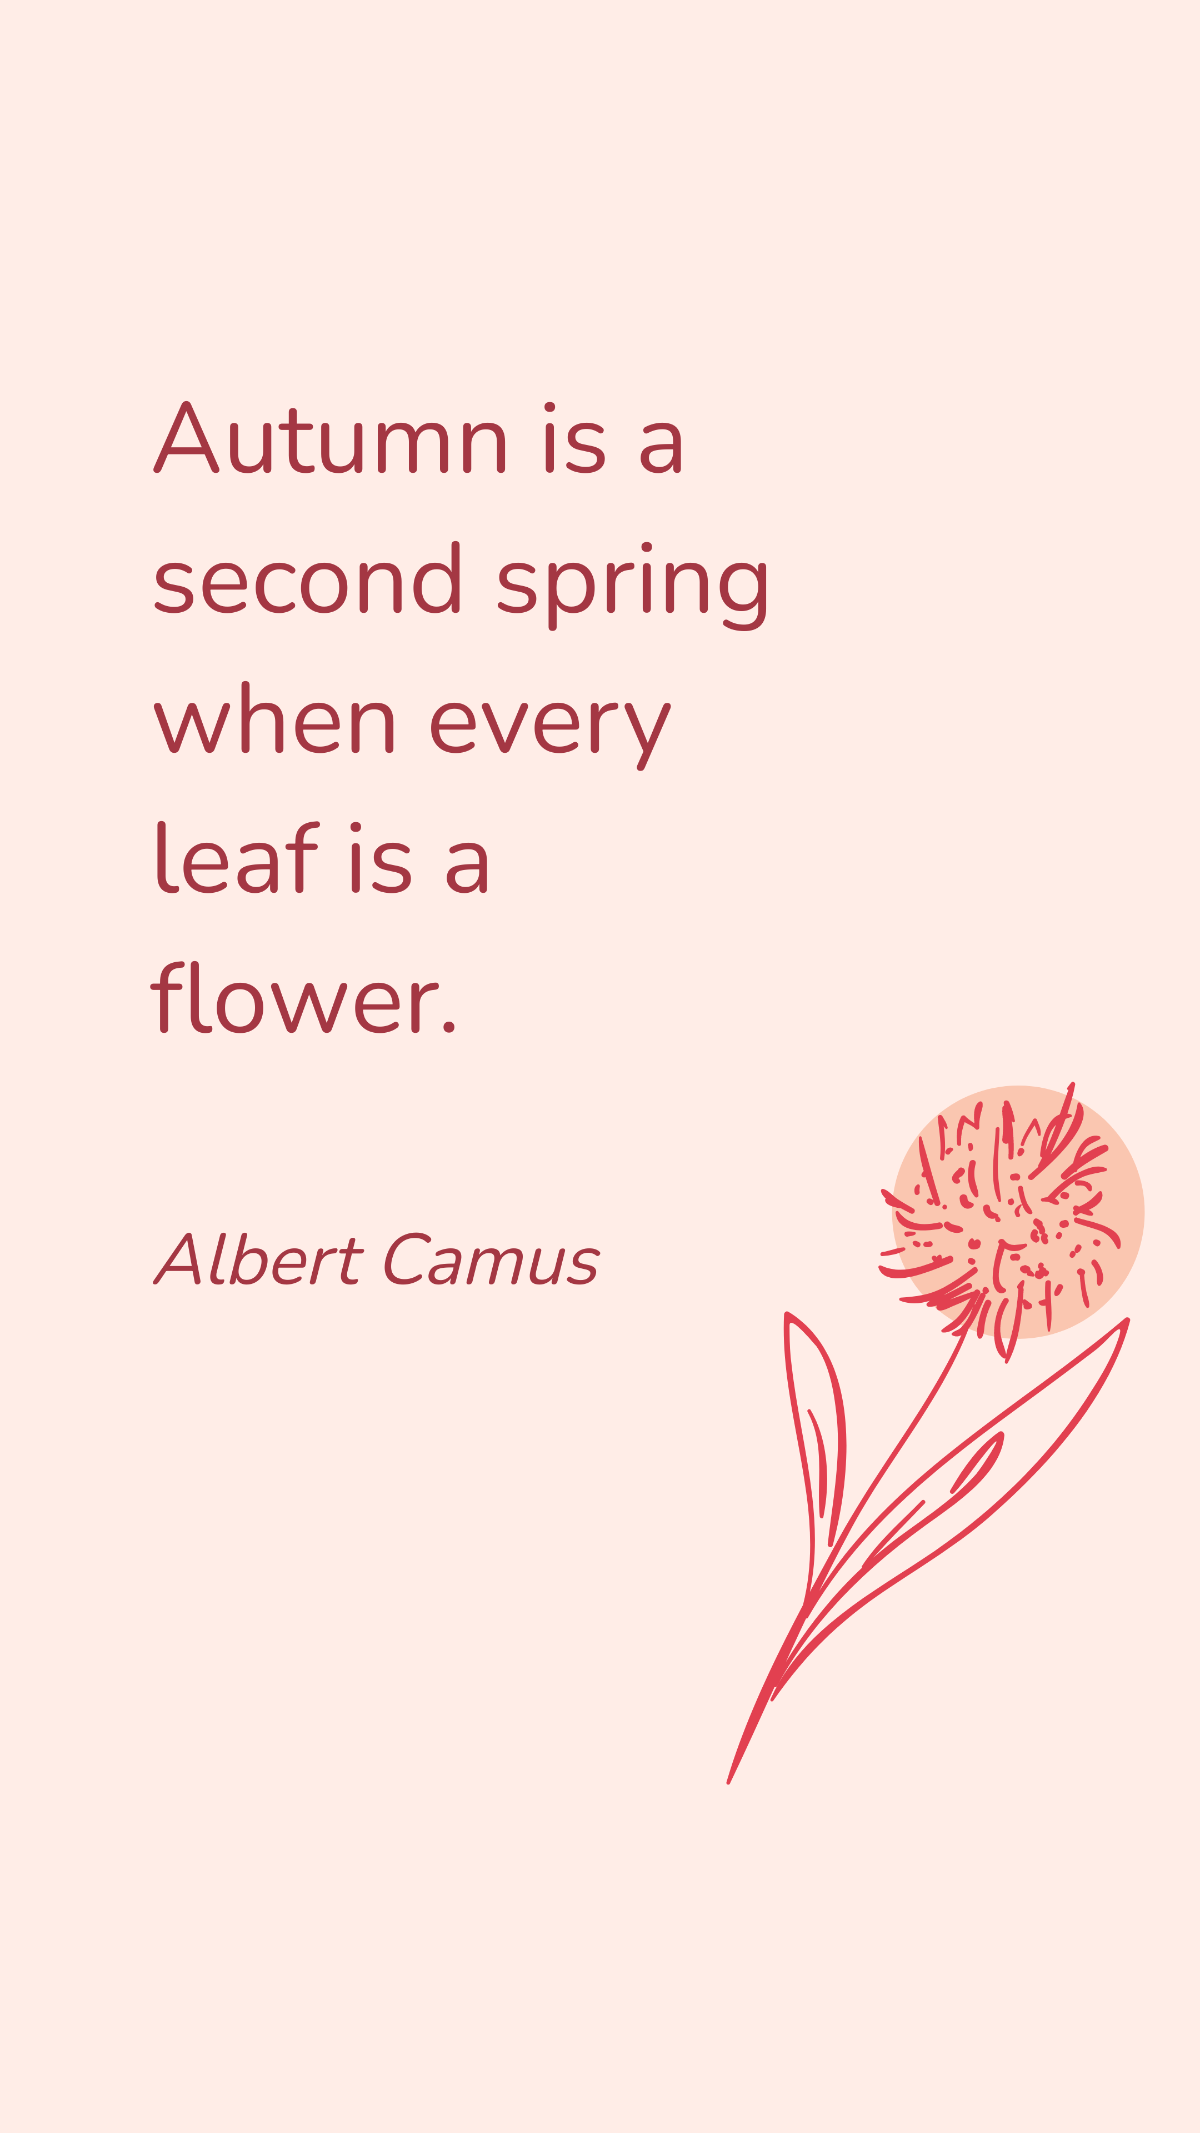 Free Albert Camus - Autumn is a second spring when every leaf is a flower. Template